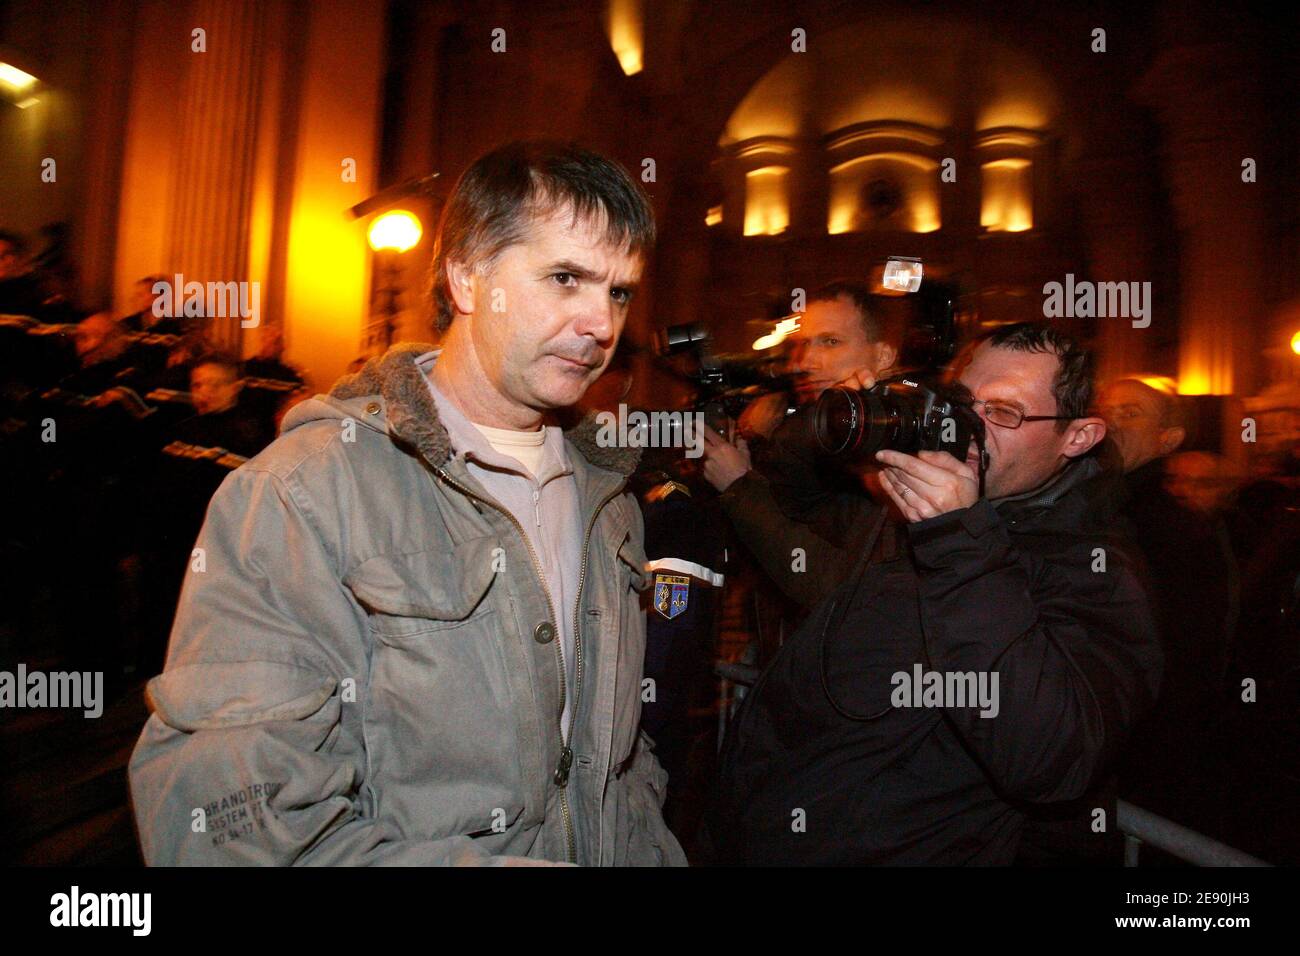 Stephane Colonna leaves the court in Paris, France on December 13, 2007 after the verdict in the trial of Yvan Colonna. The court found shepherd Yvan Colonna guilty of killing France's top government representative in Corsica, Claude Erignac in 1998, and sentenced him to life in jail following a month-long trial. Photo by Mousse/ABACAPRESS.COM Stock Photo